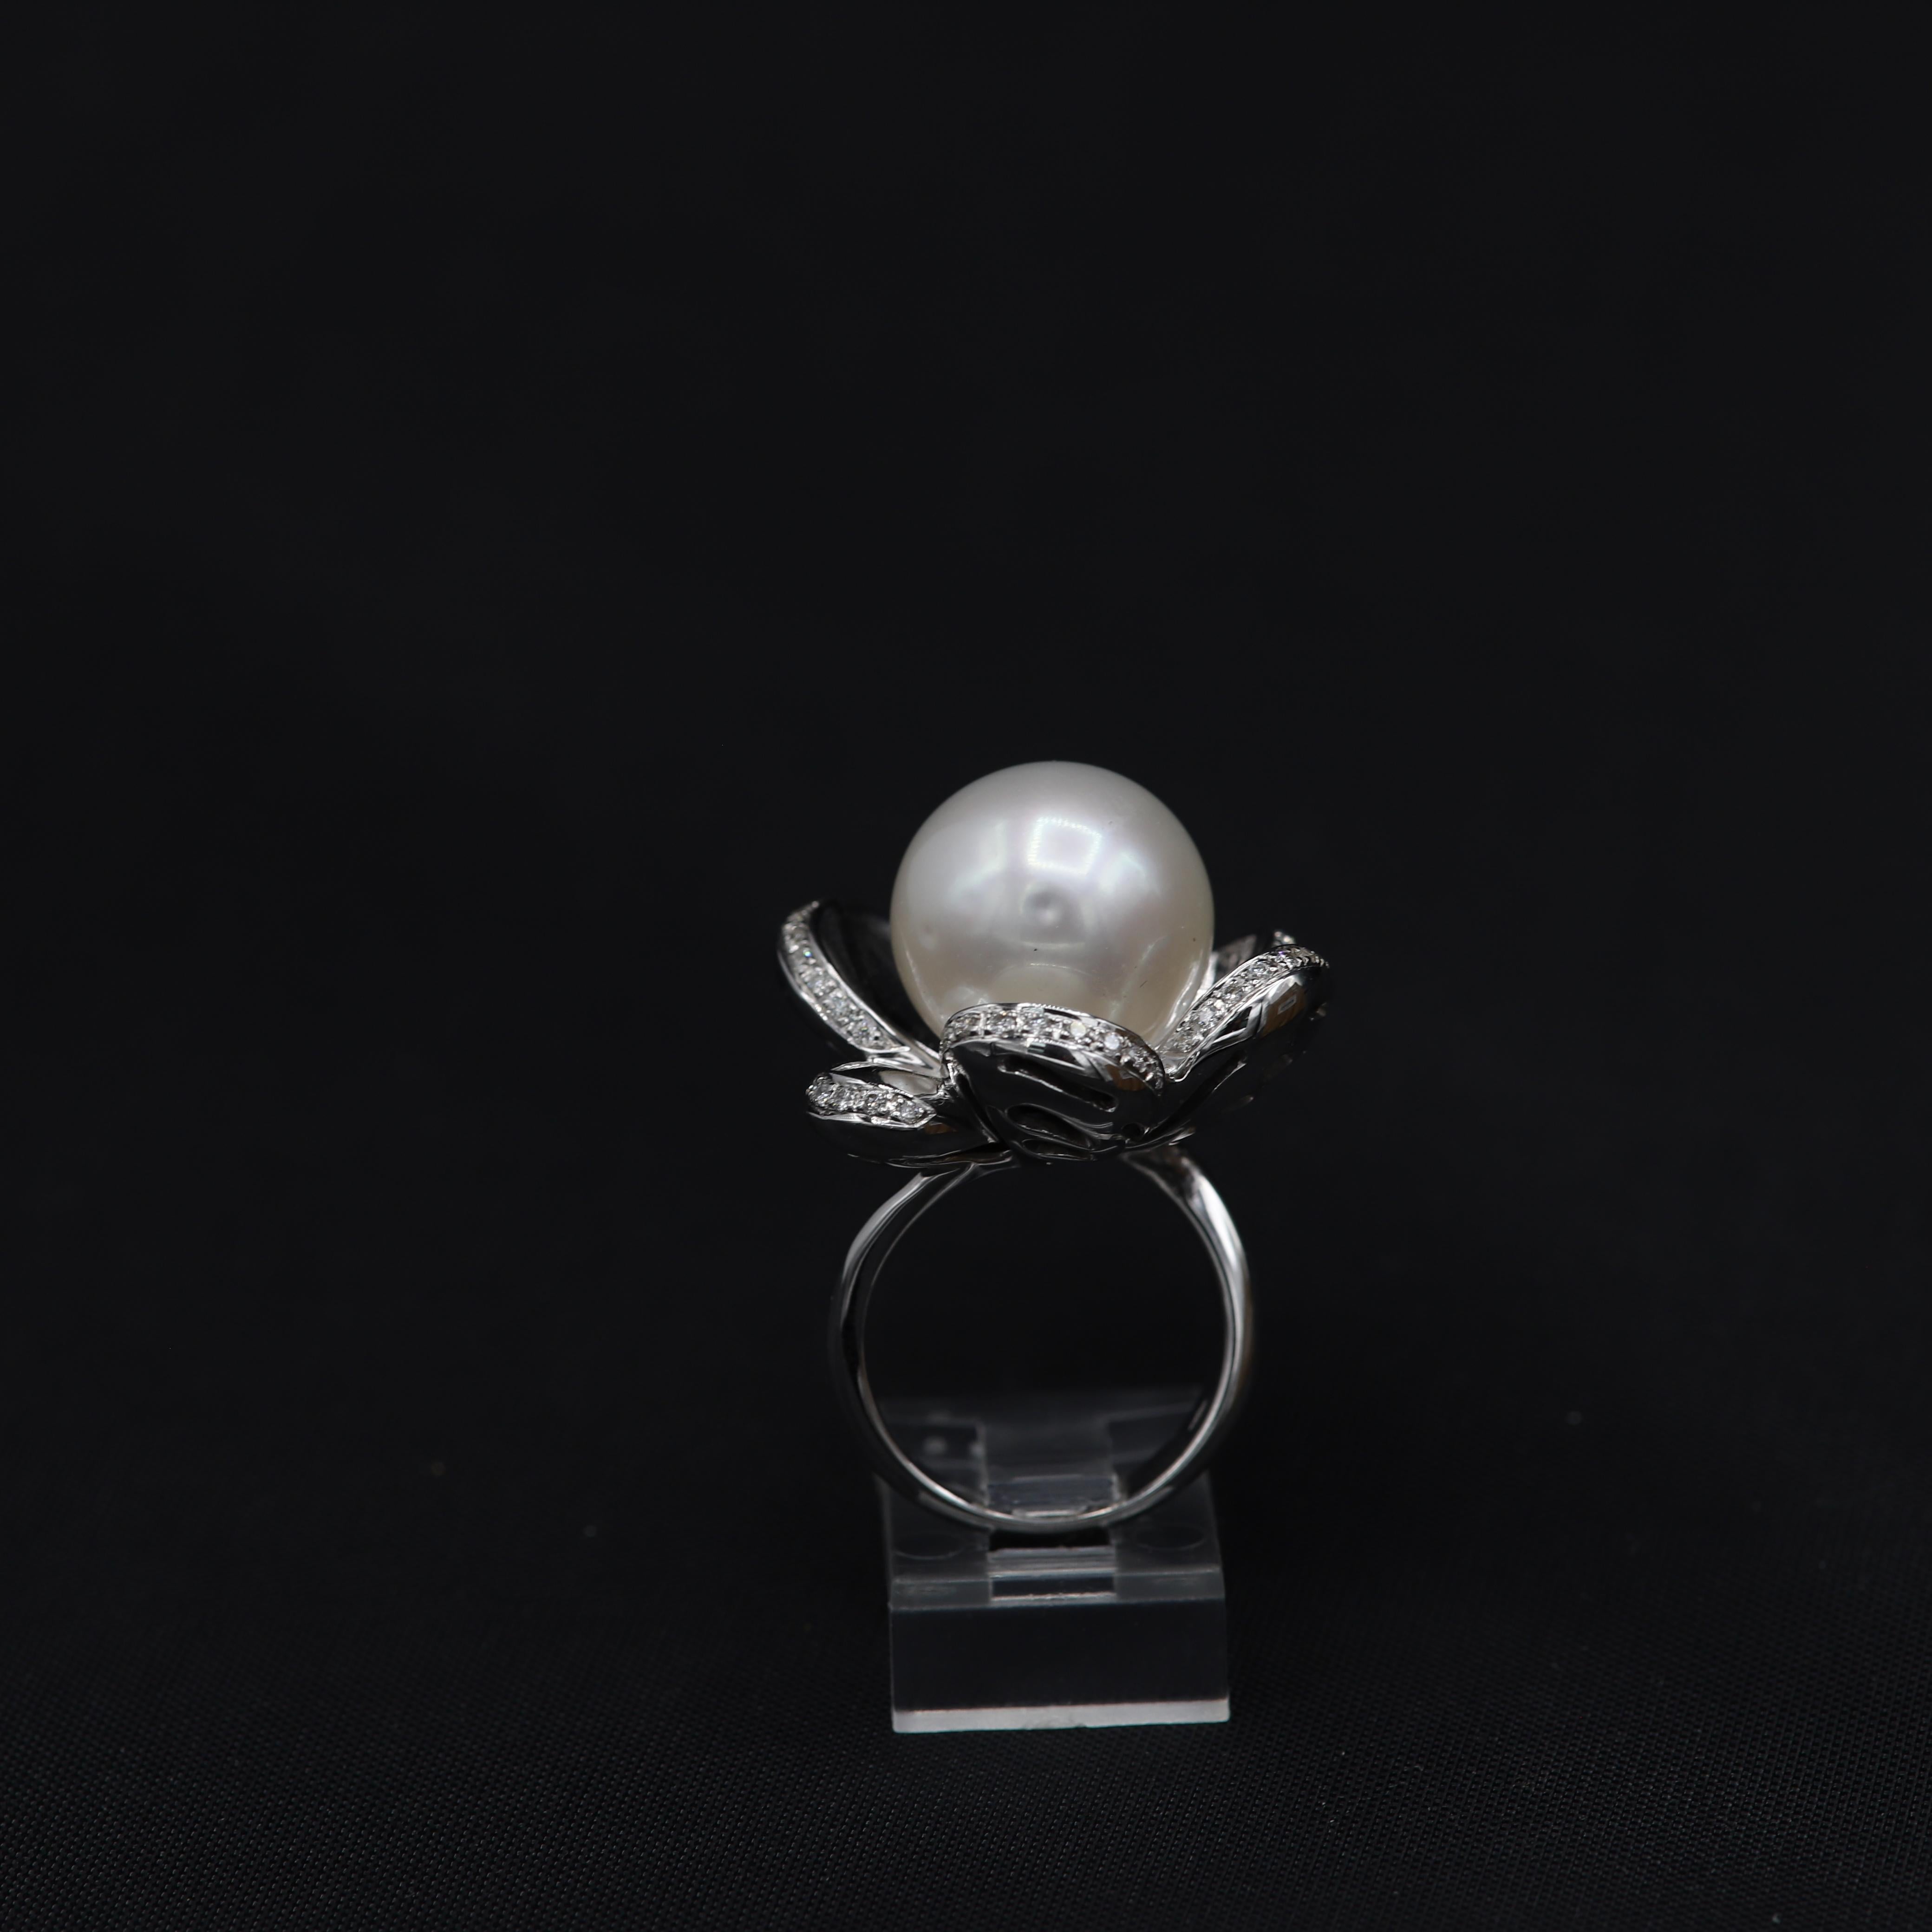 Large South Sea Pearl Flower Ring
Large 15 mm
18k White Gold  25 grams
Diamonds 0.48 carat G-VS
overall design area approx 25mm
Good Nice Luster Pearl
Finger Size 7

